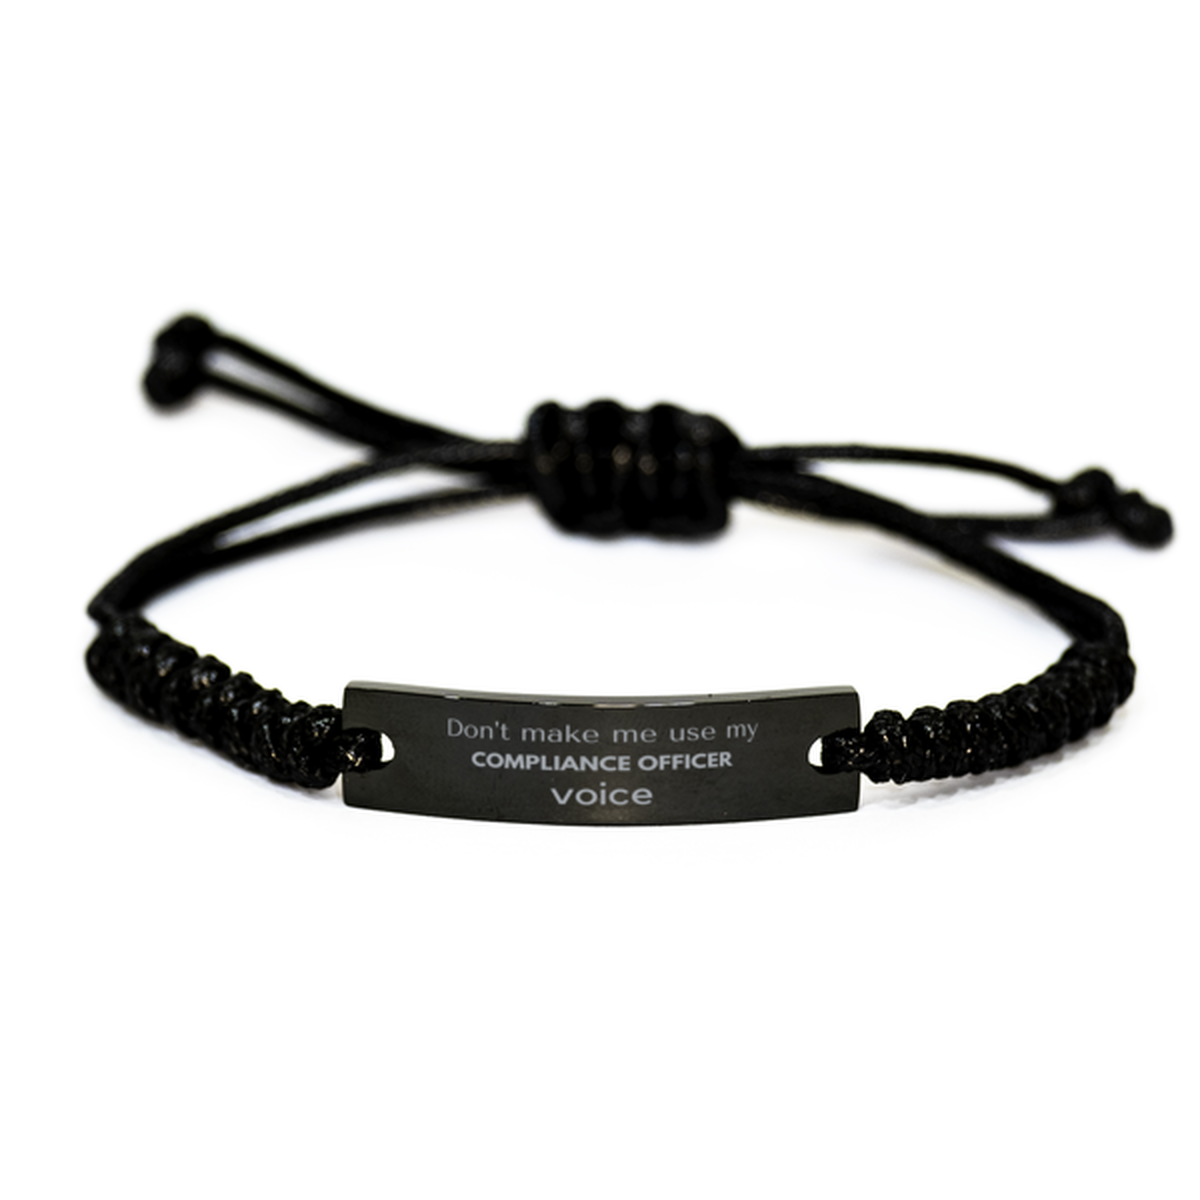 Don't make me use my Compliance Officer voice, Sarcasm Compliance Officer Gifts, Christmas Compliance Officer Black Rope Bracelet Birthday Unique Gifts For Compliance Officer Coworkers, Men, Women, Colleague, Friends